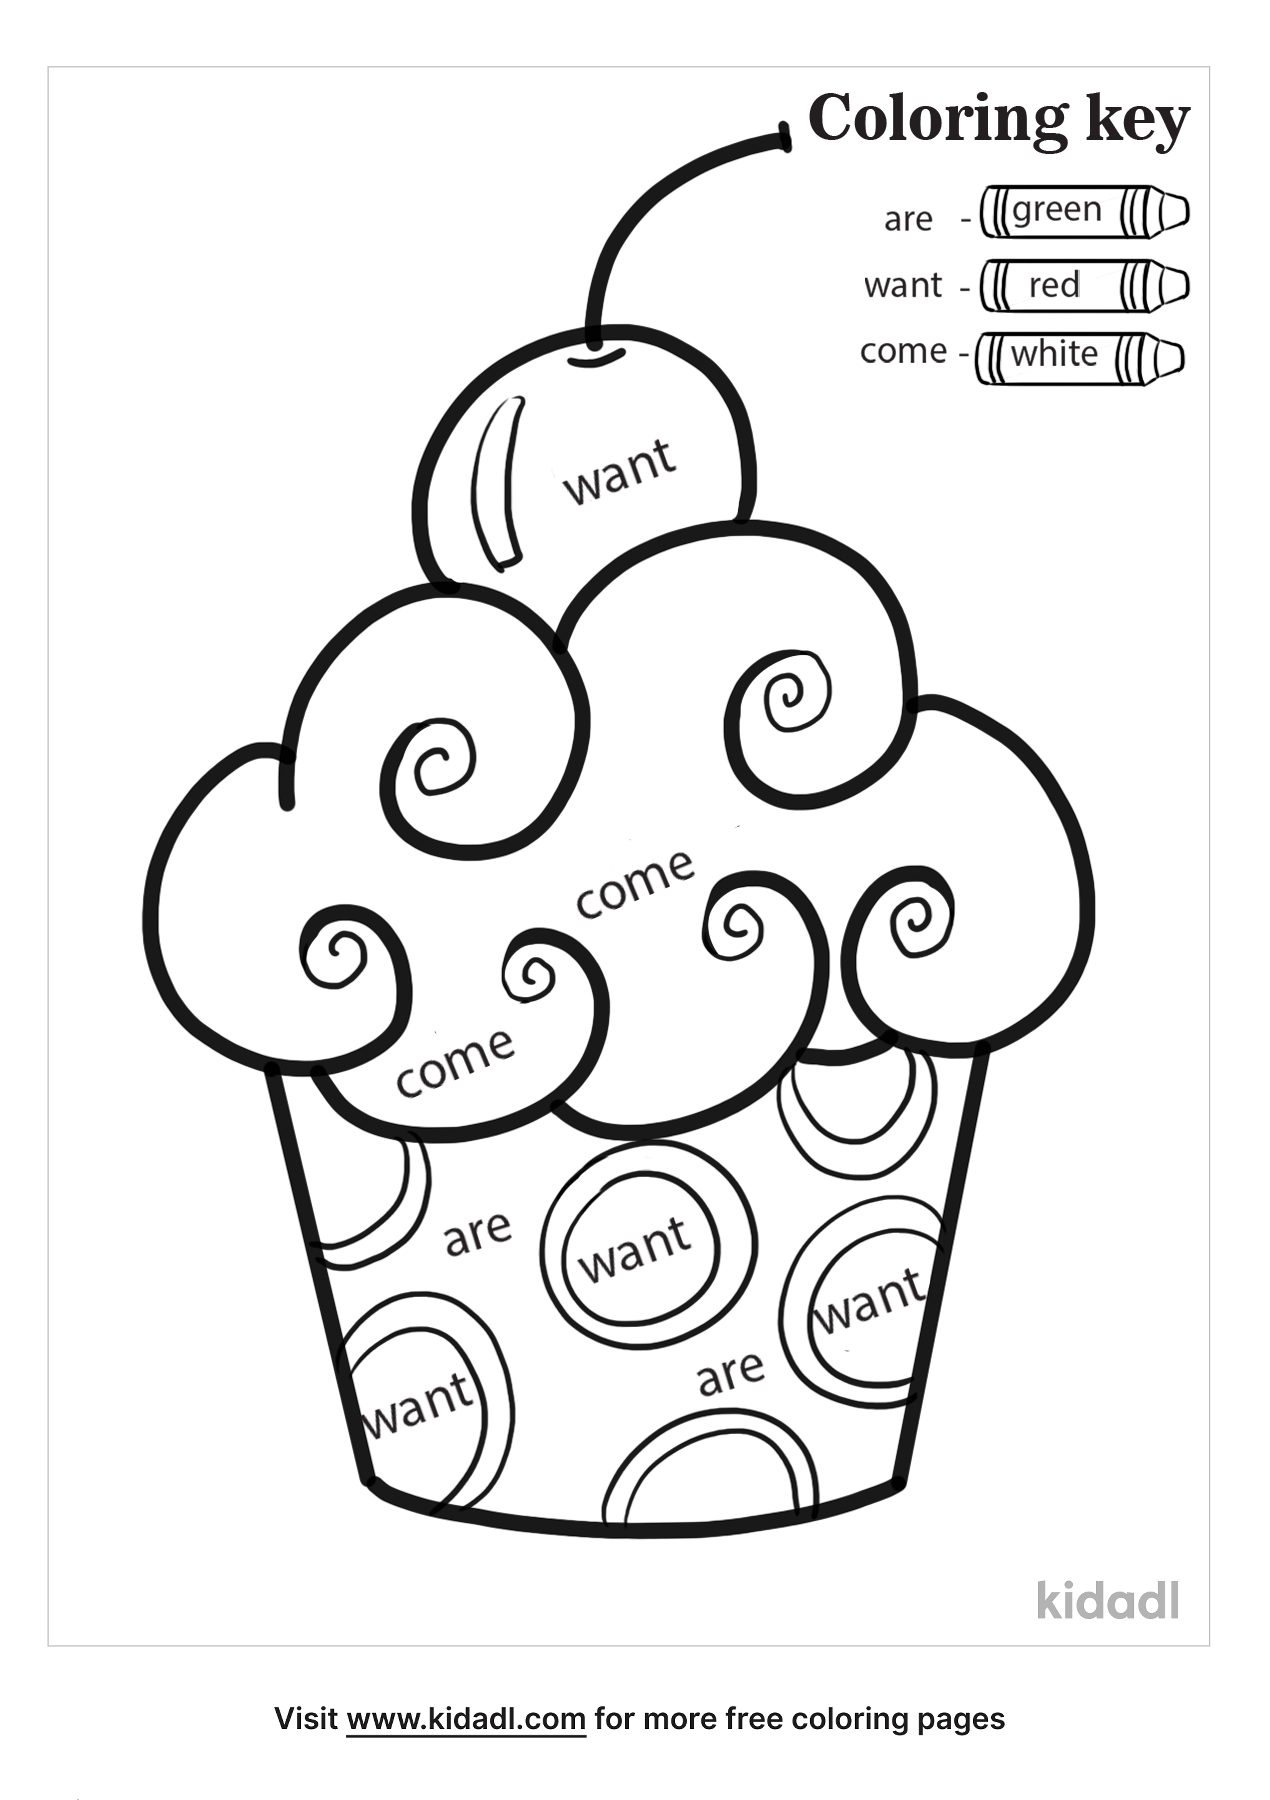 Sight Word Coloring Pages | Free Words & Quotes Coloring Pages | Kidadl